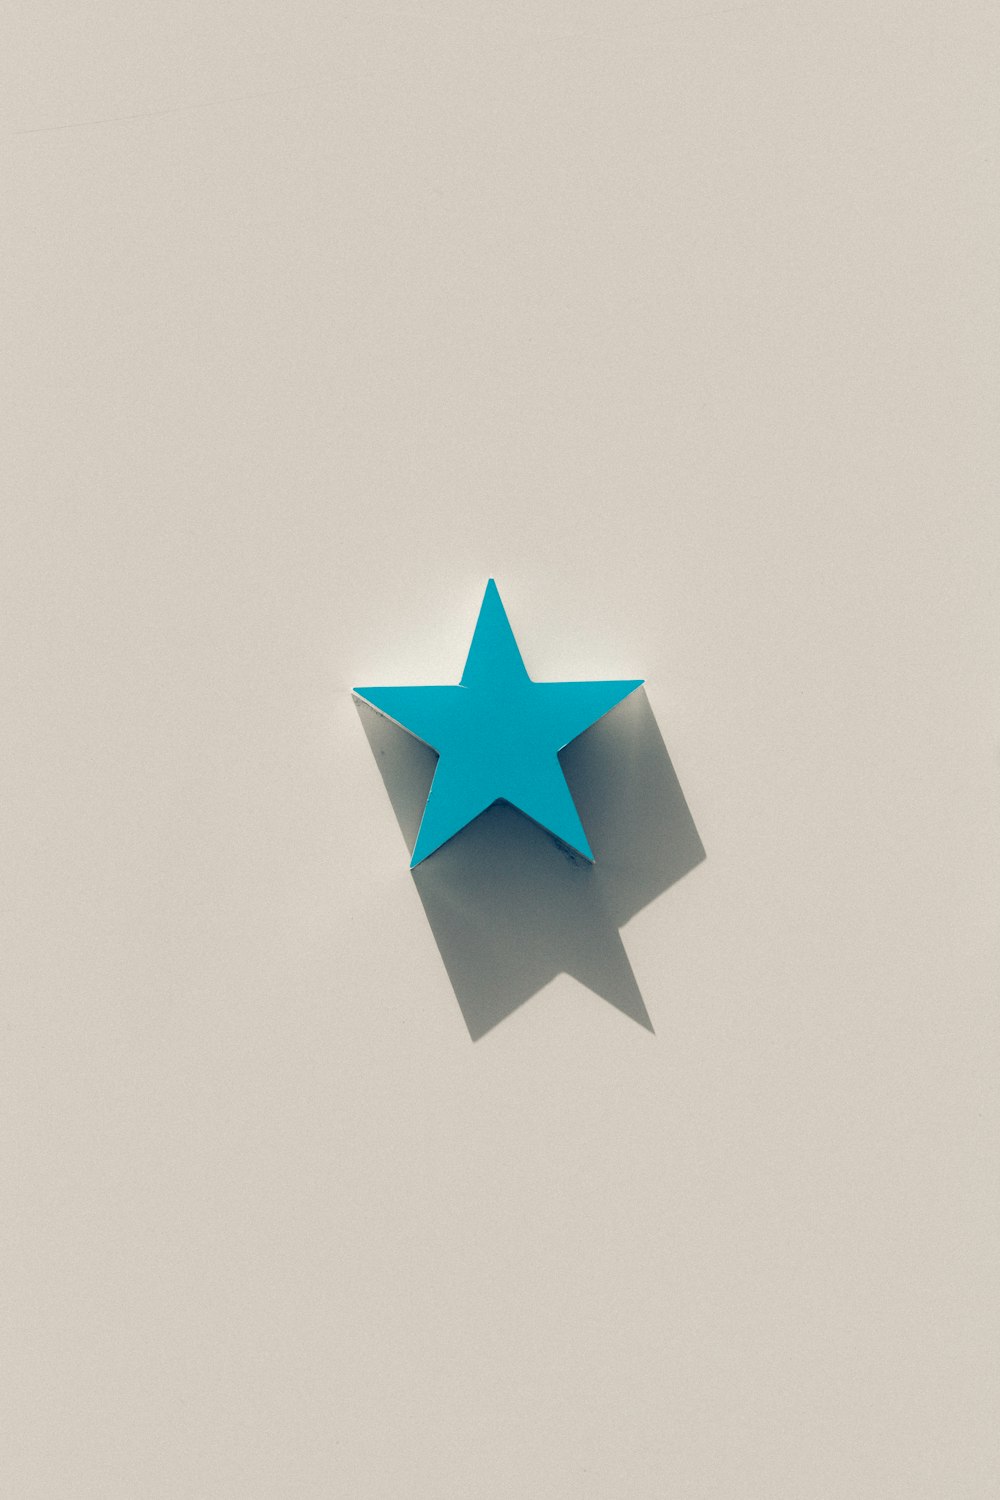 blue star illustration with white background